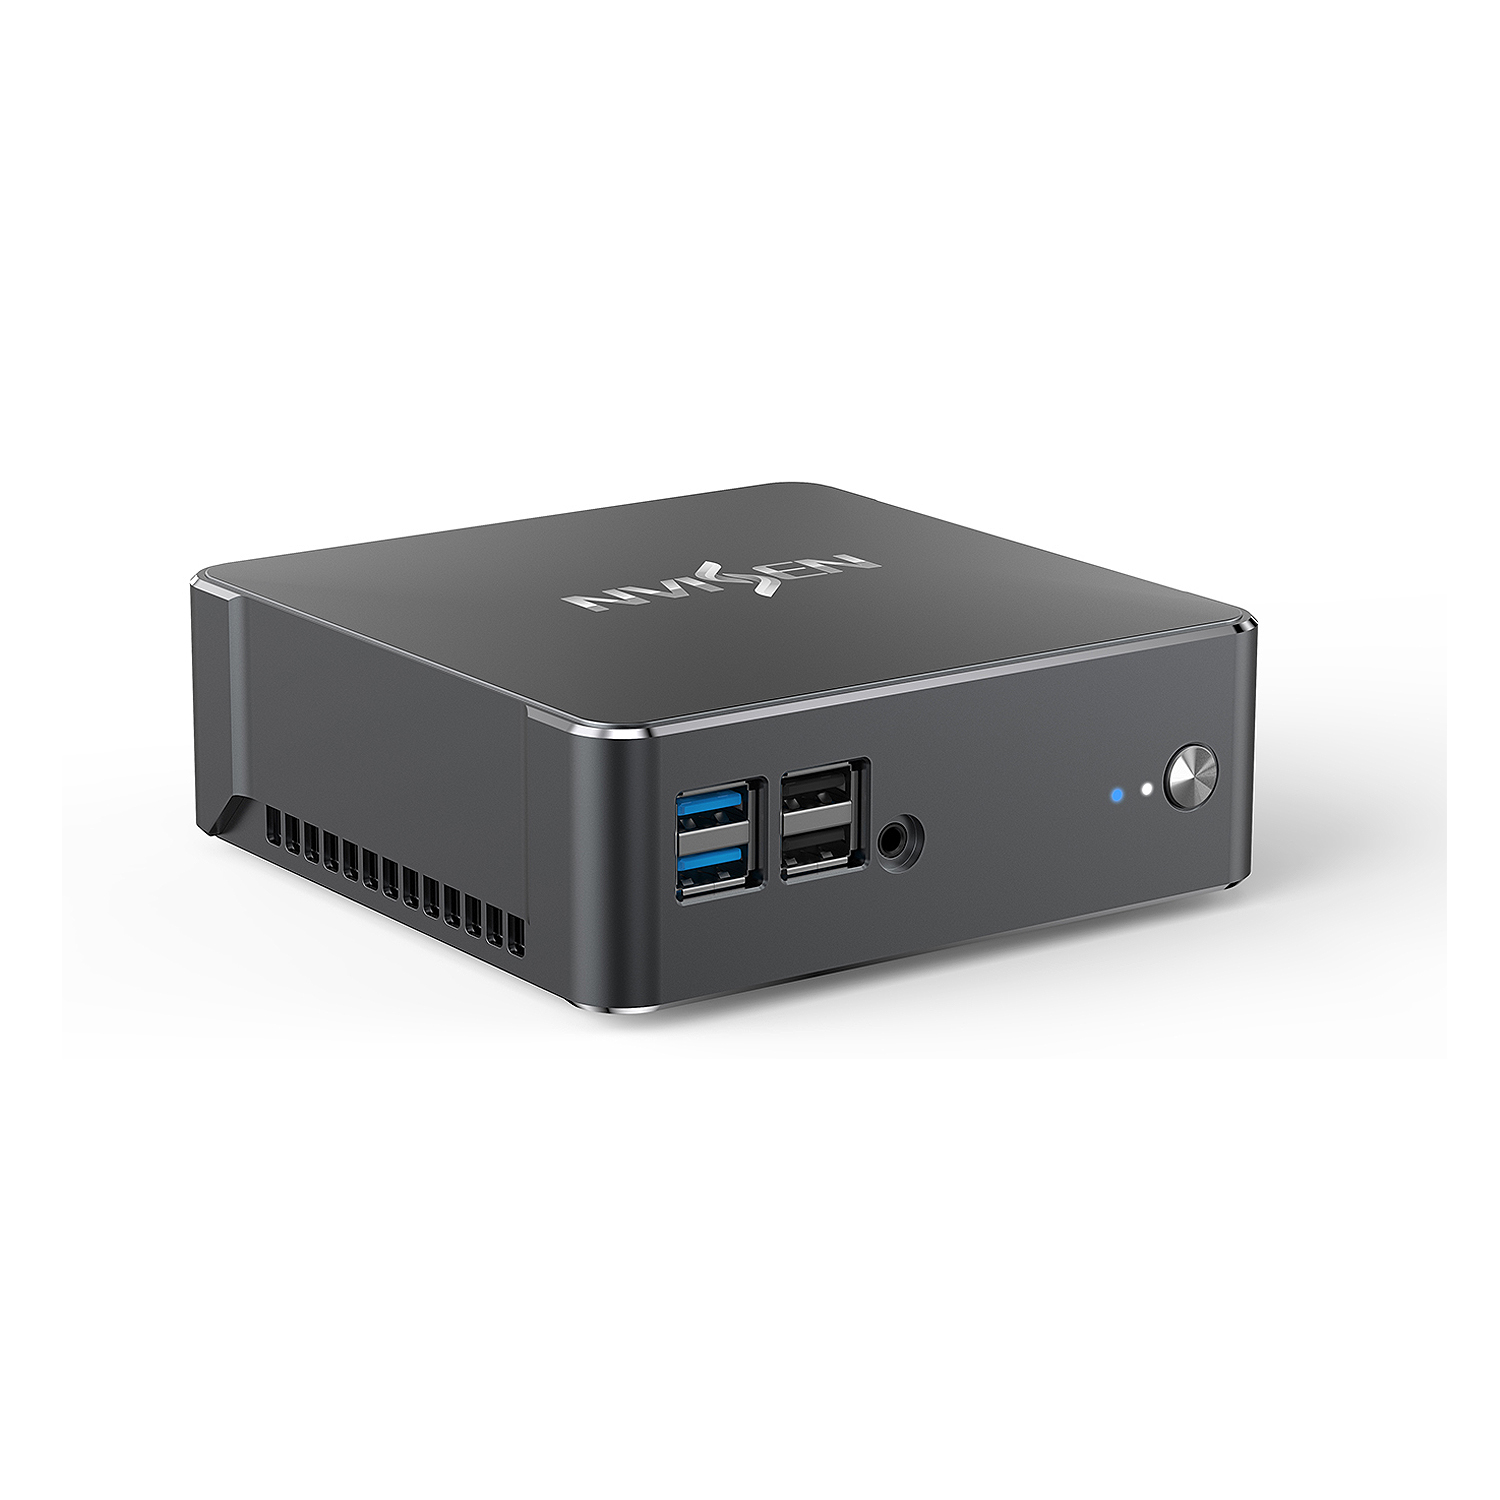 Find NVISEN MU02 Intel i7-1065G7 Intel Plus Graphics Mini PC 16GB DDR4 512GB M.2 SSD Desktop PC Quad Core 15W TDP 1.3GHz to 3.9GHz WiFi 5 BT 4.2 LAN HD DP Dual 4K Screen Windows 10 for Sale on Gipsybee.com with cryptocurrencies